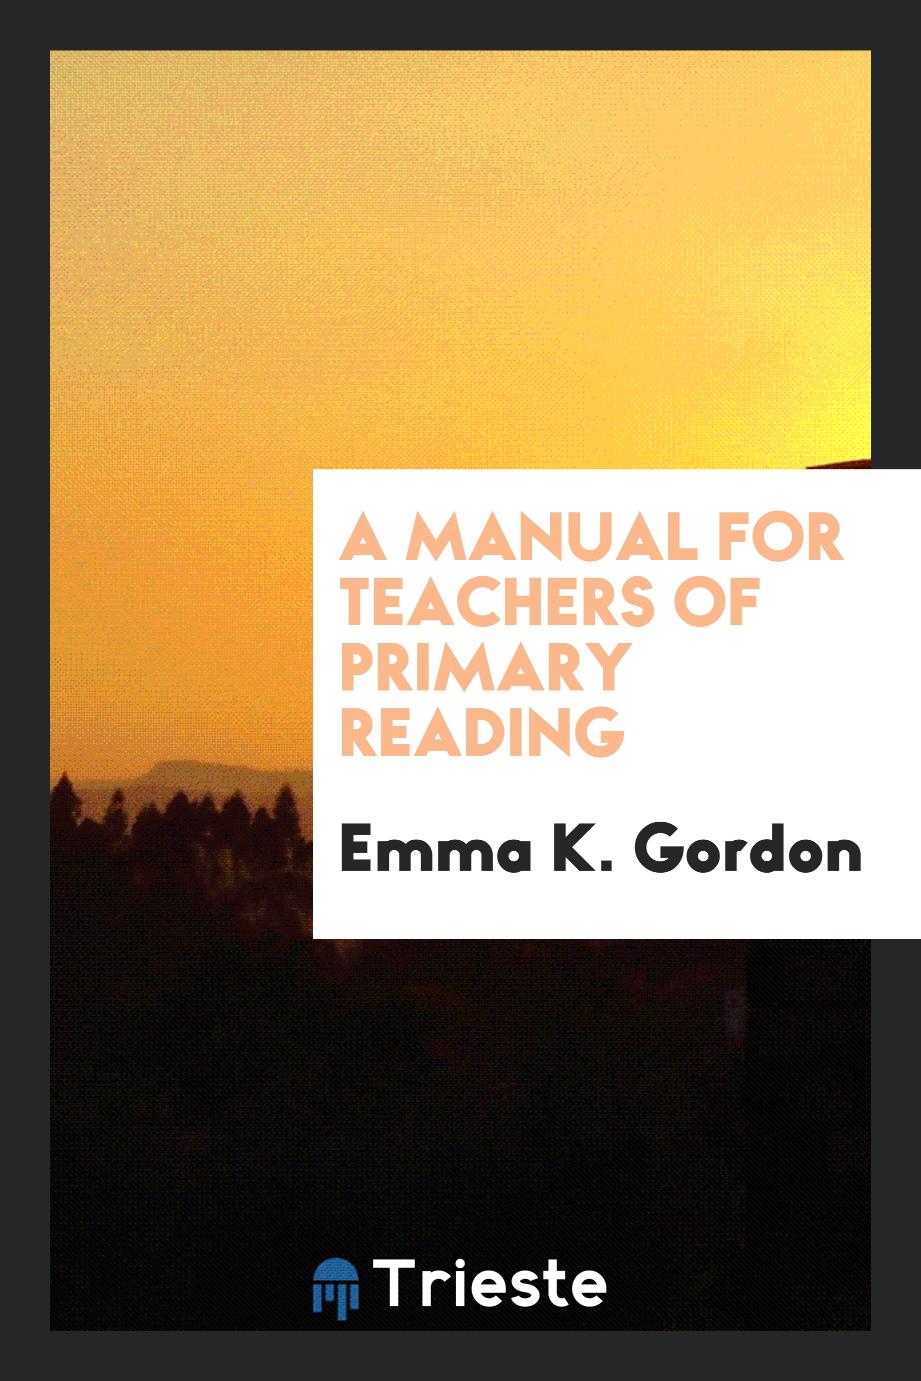 A Manual for Teachers of Primary Reading